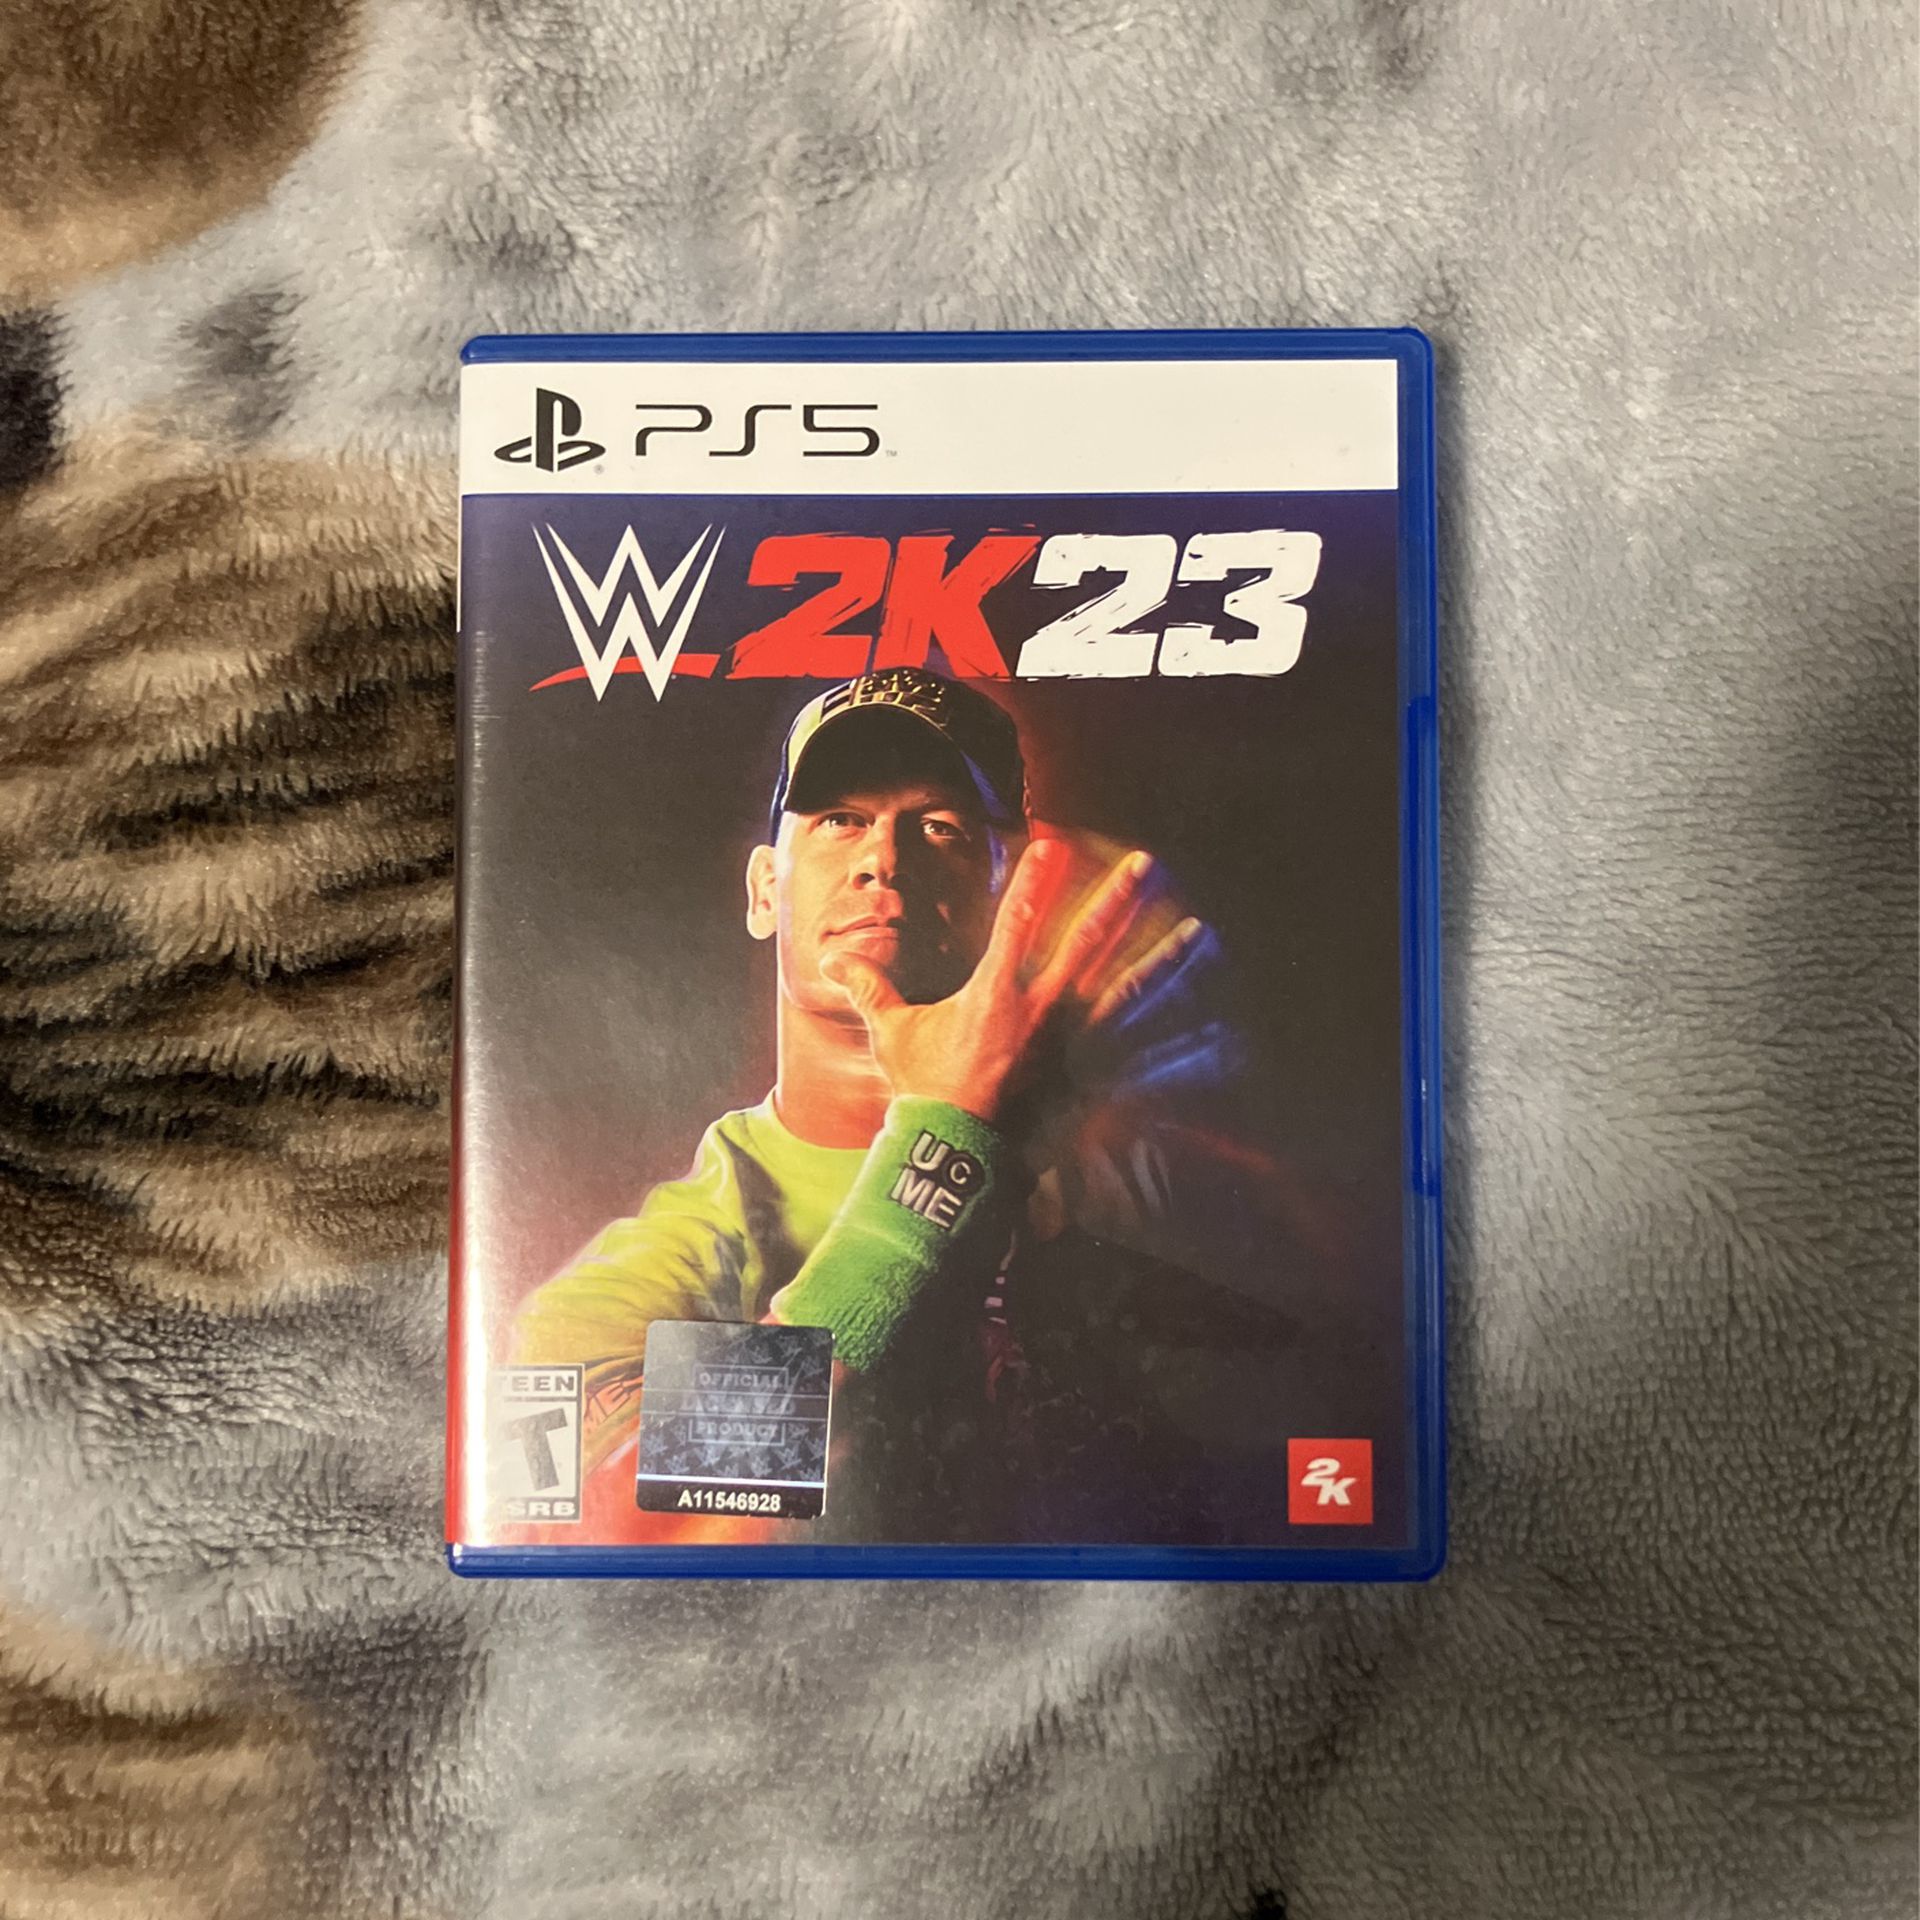  PS5 GAME - WWE 2K23 (Good Condition)